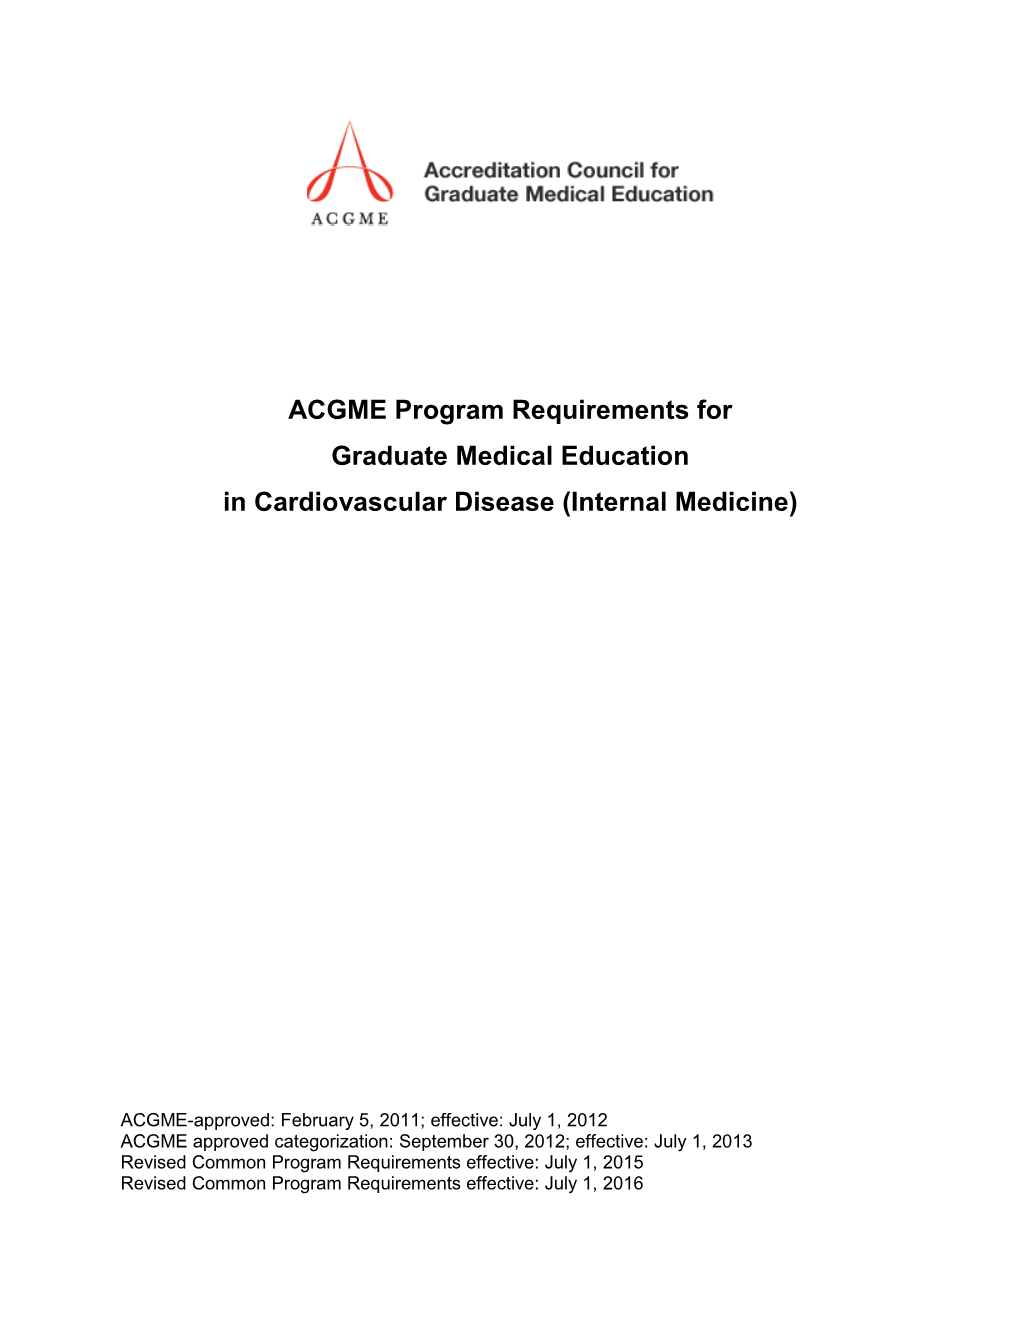 ACGME Program Requirements for Graduate Medical Education in Cardiovascular Disease (Internal Medicine)